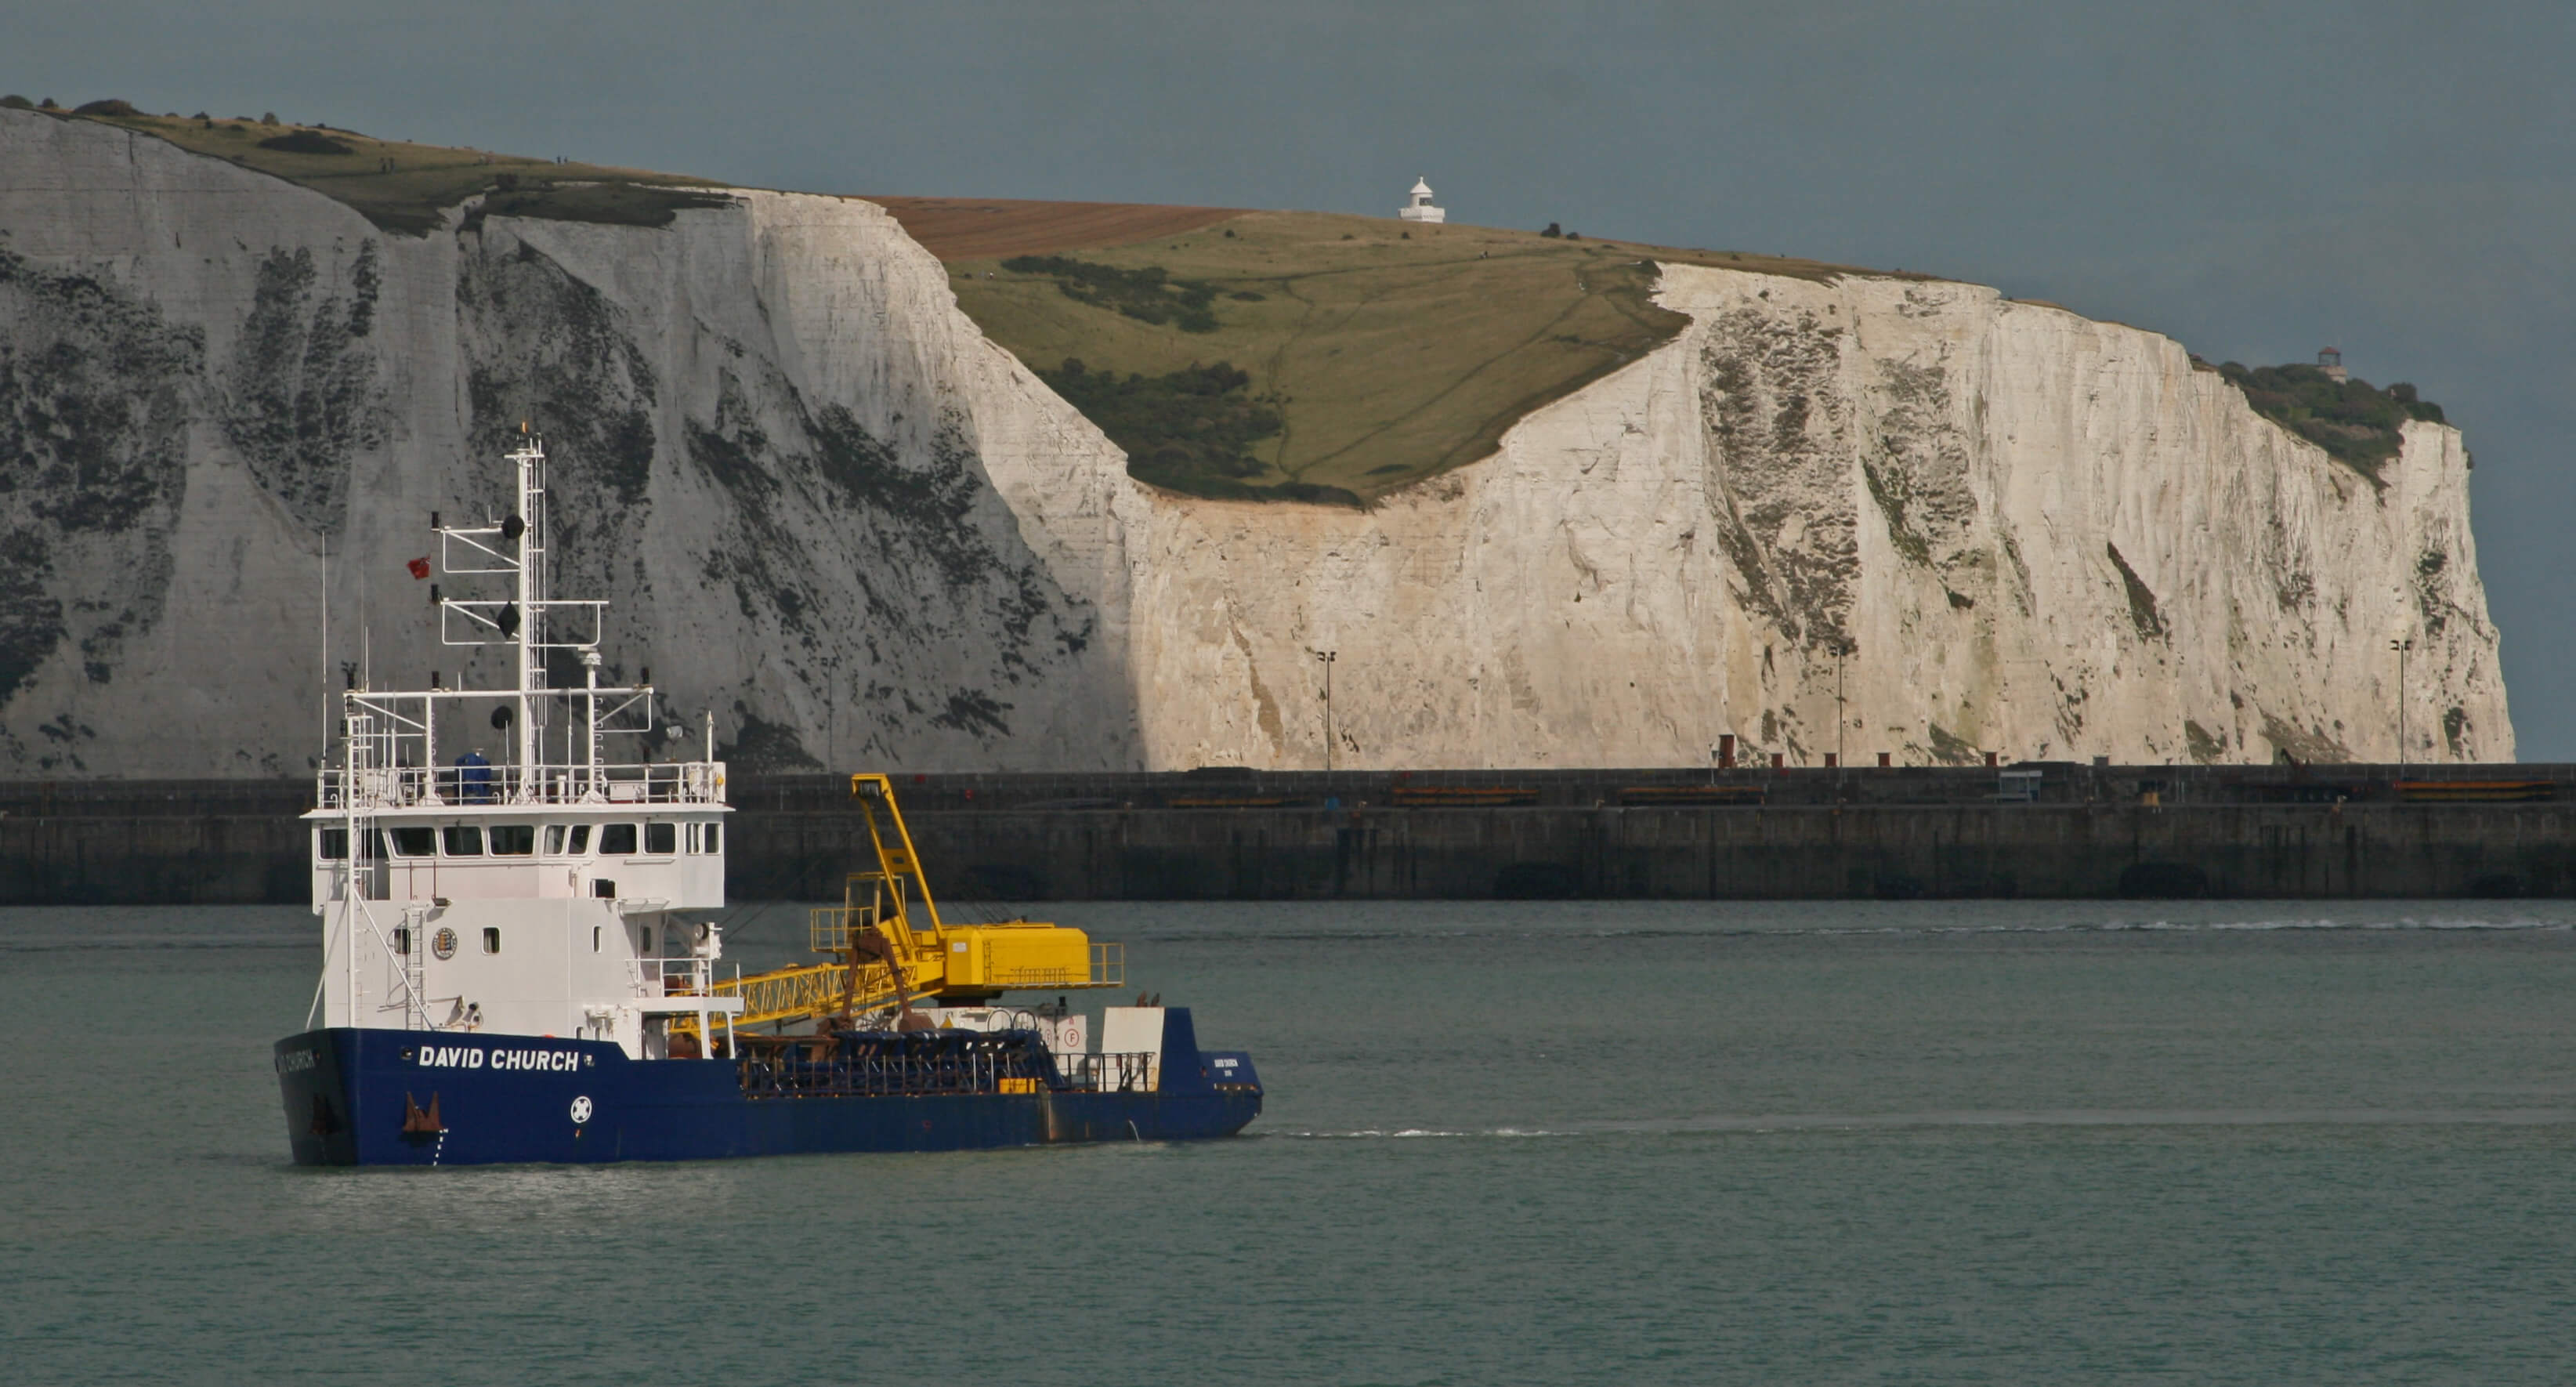 Dover Harbour Board dredger David Church in Eastern Docks with the white cliffs in the background. © Glen/Flickr